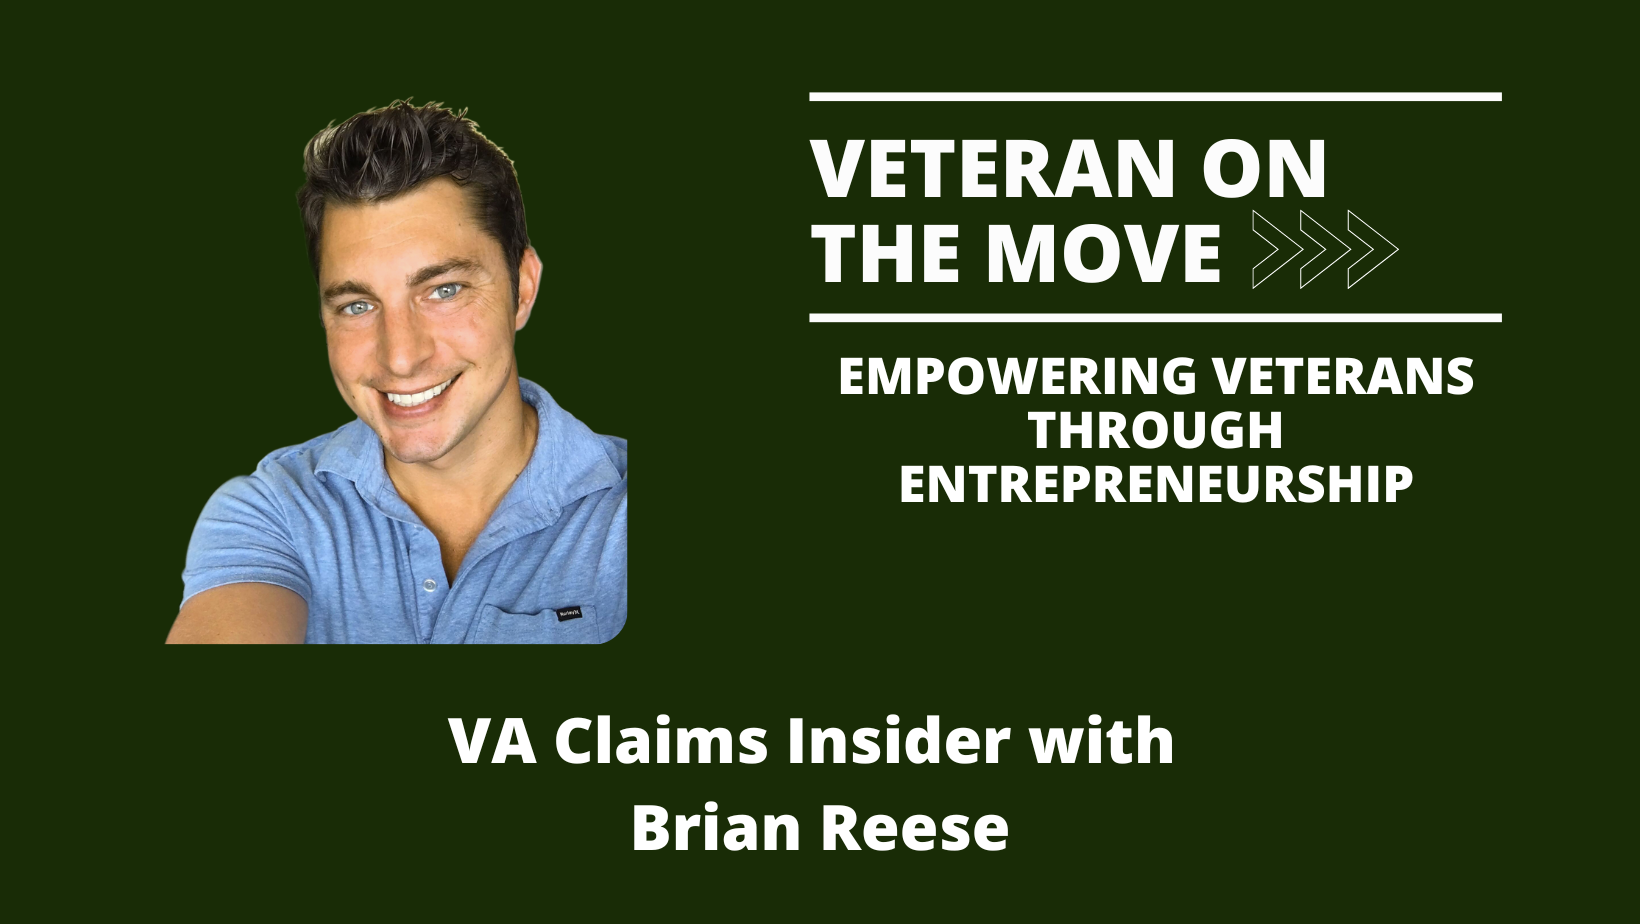 Brian Reese; Veteran On the Move